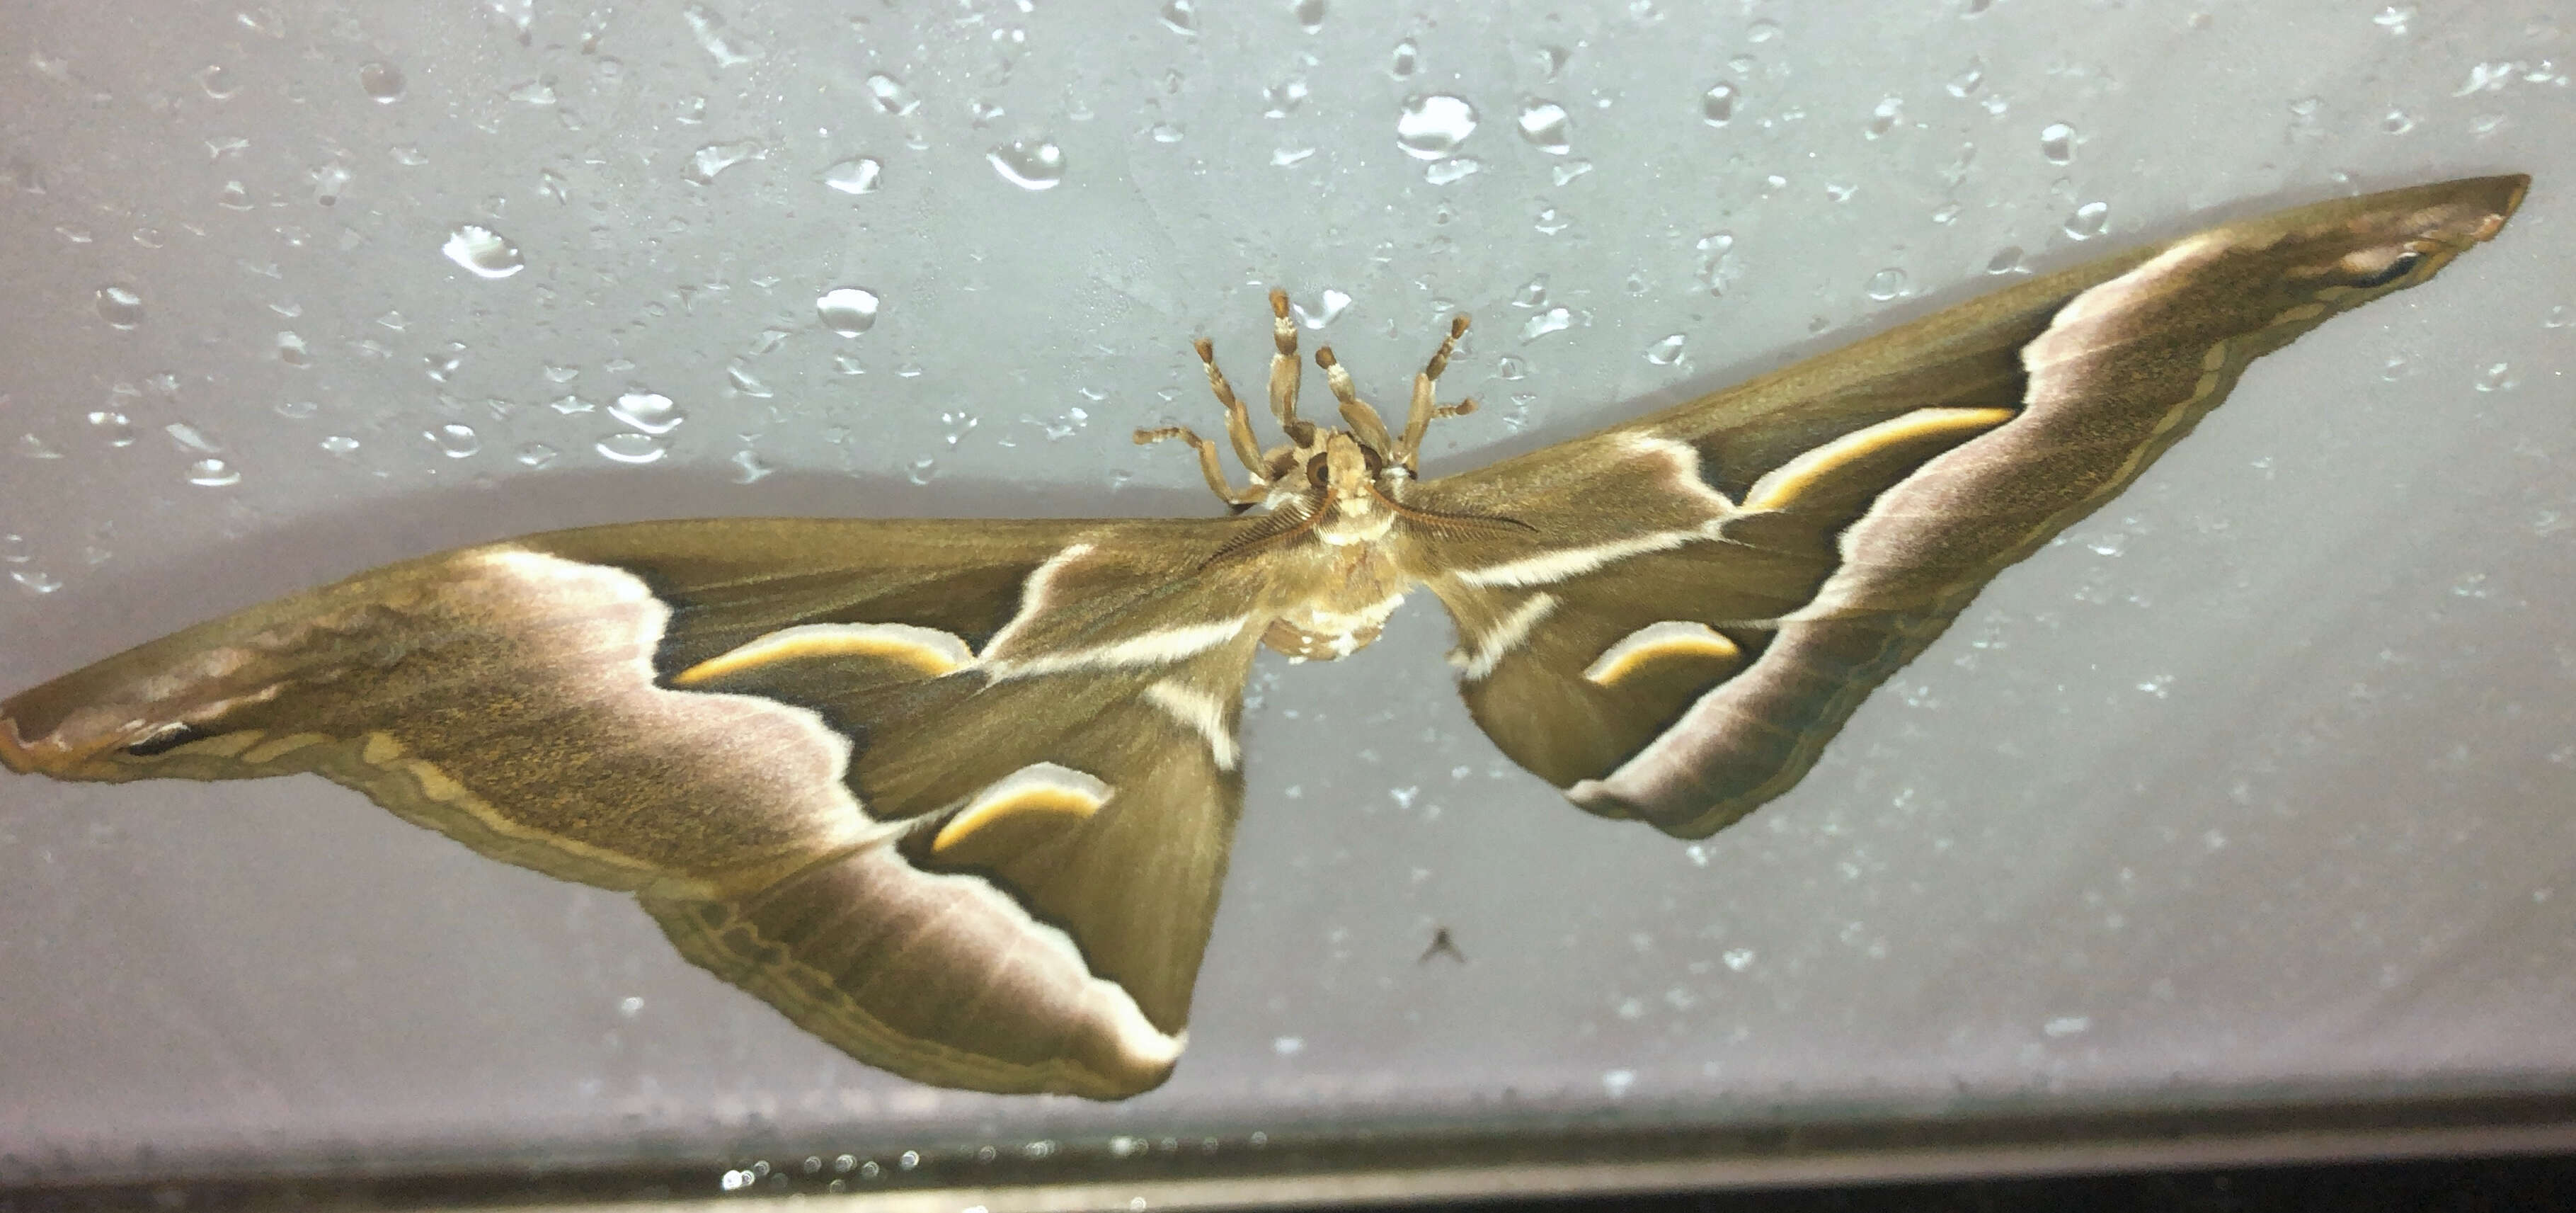 Image of Ailanthus Silkmoth